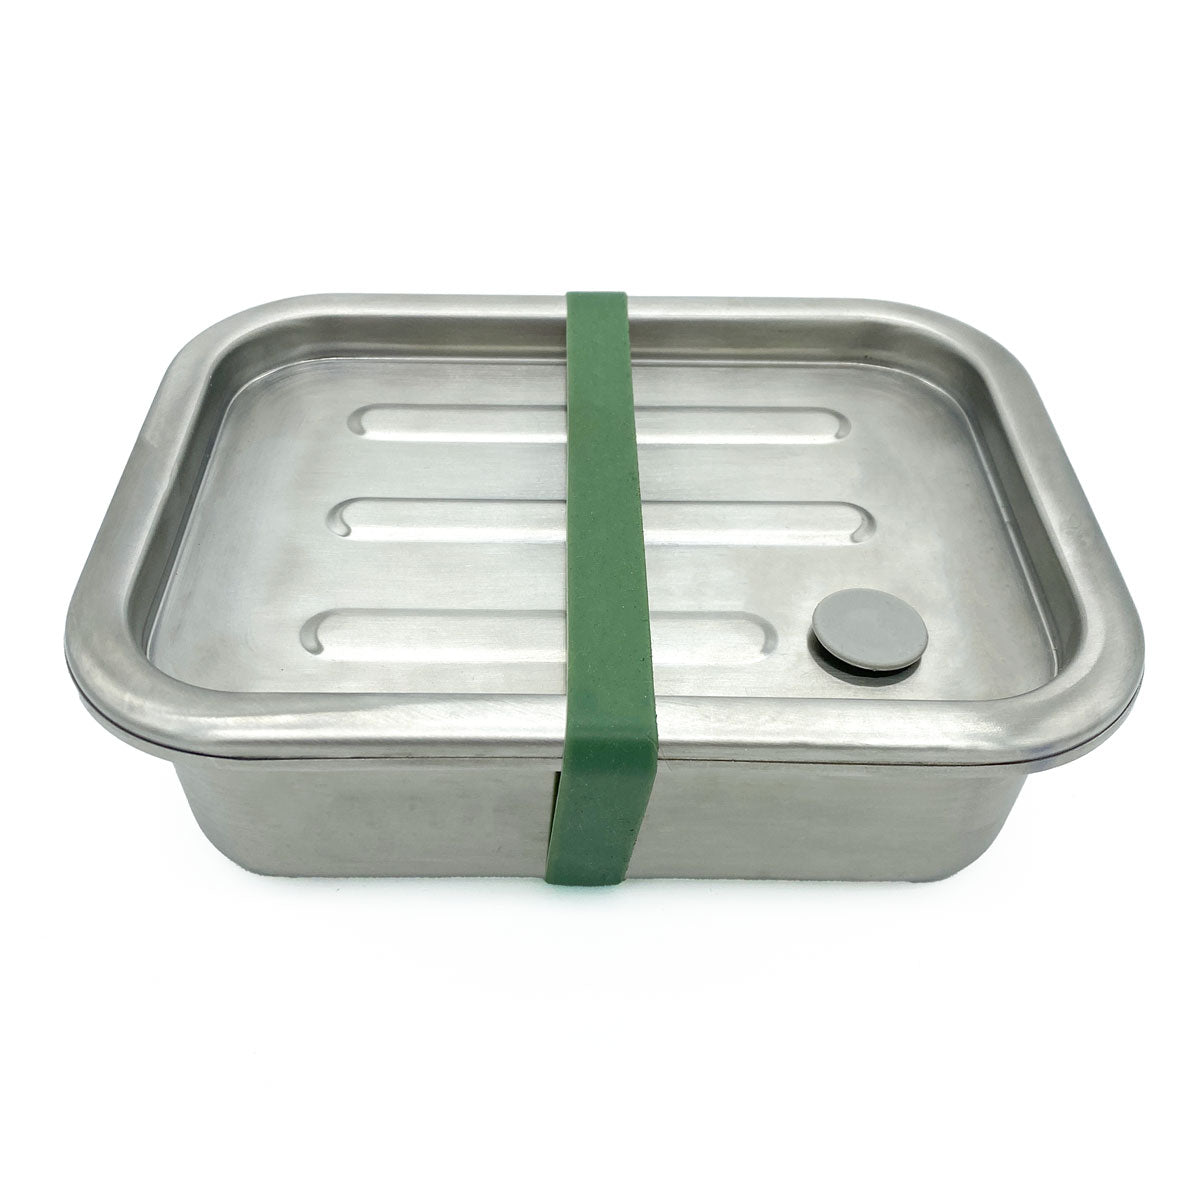 beeskin stainless steel snack box closed with green rubber band